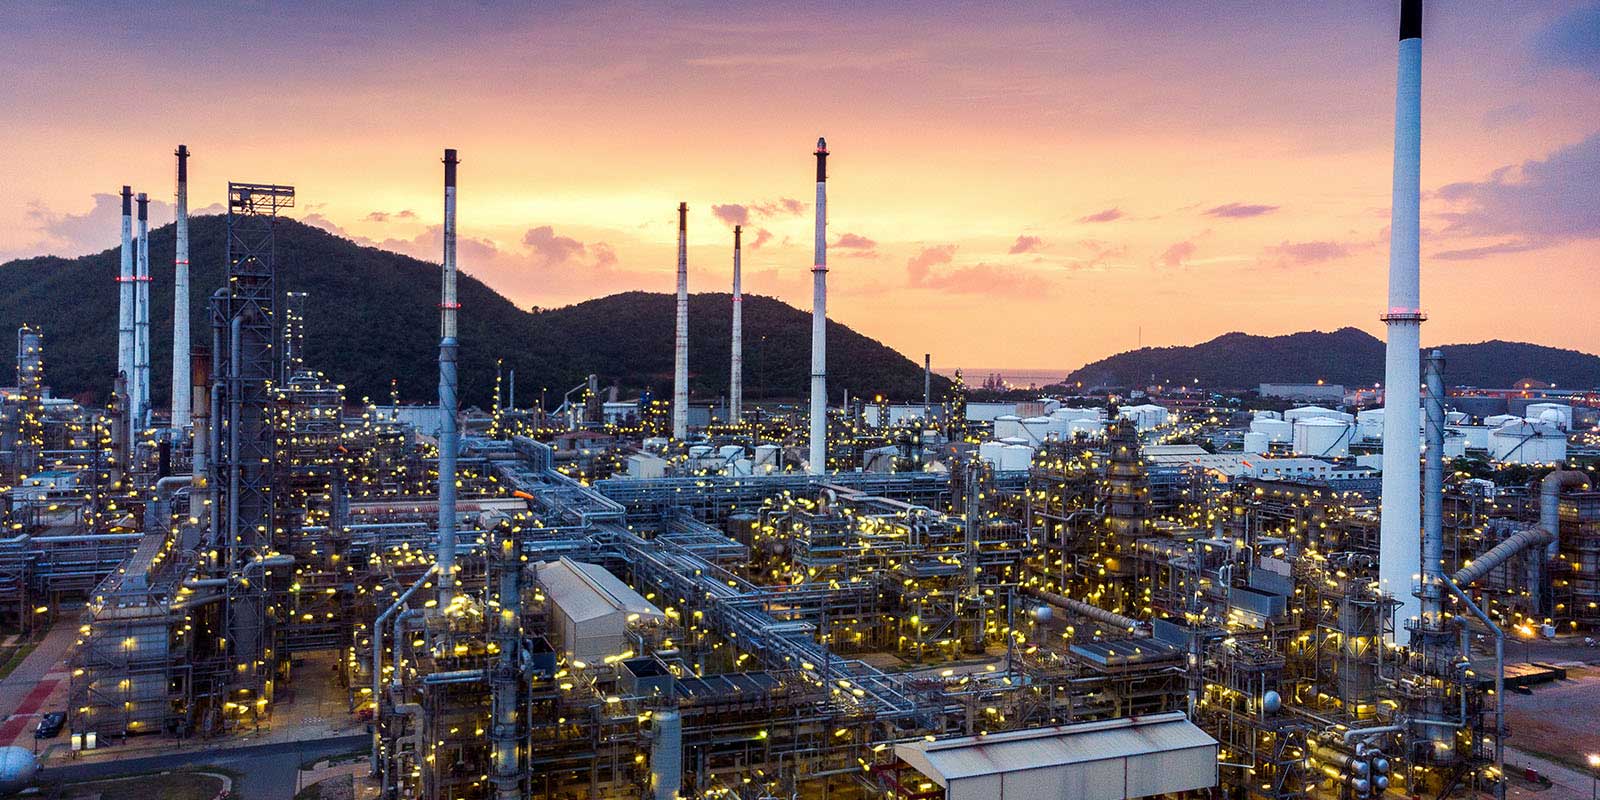 Industry Refining & Petrochemicals